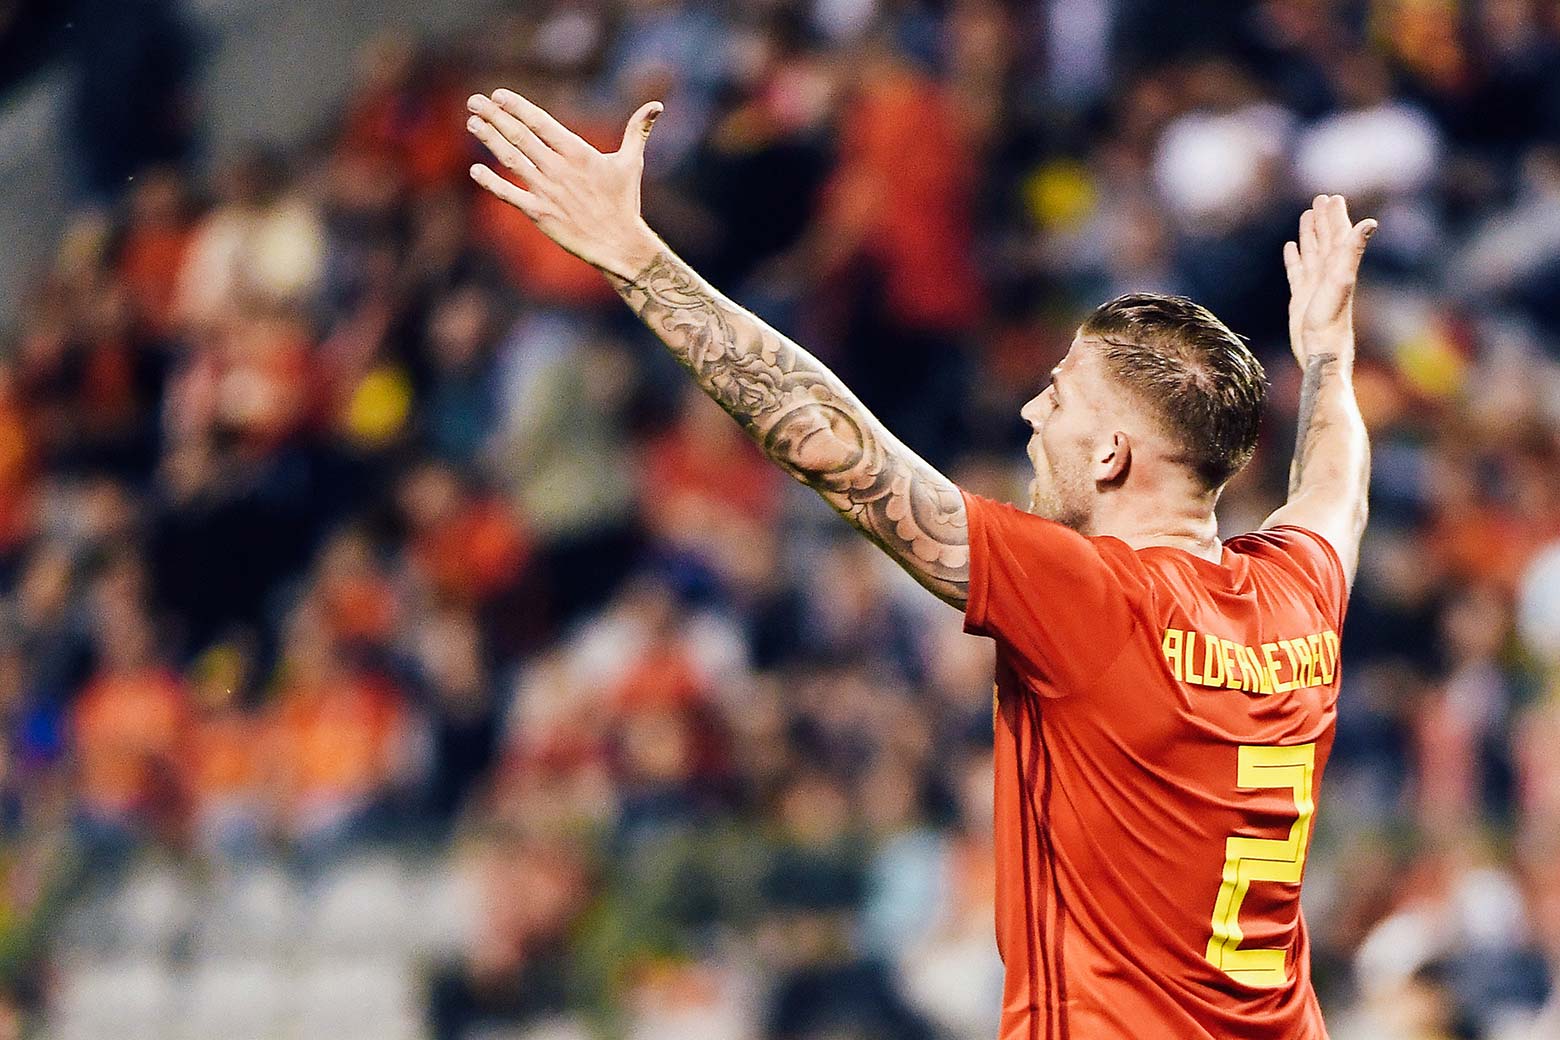 Toby Alderweireld holds up his tattooed arms while on the field.